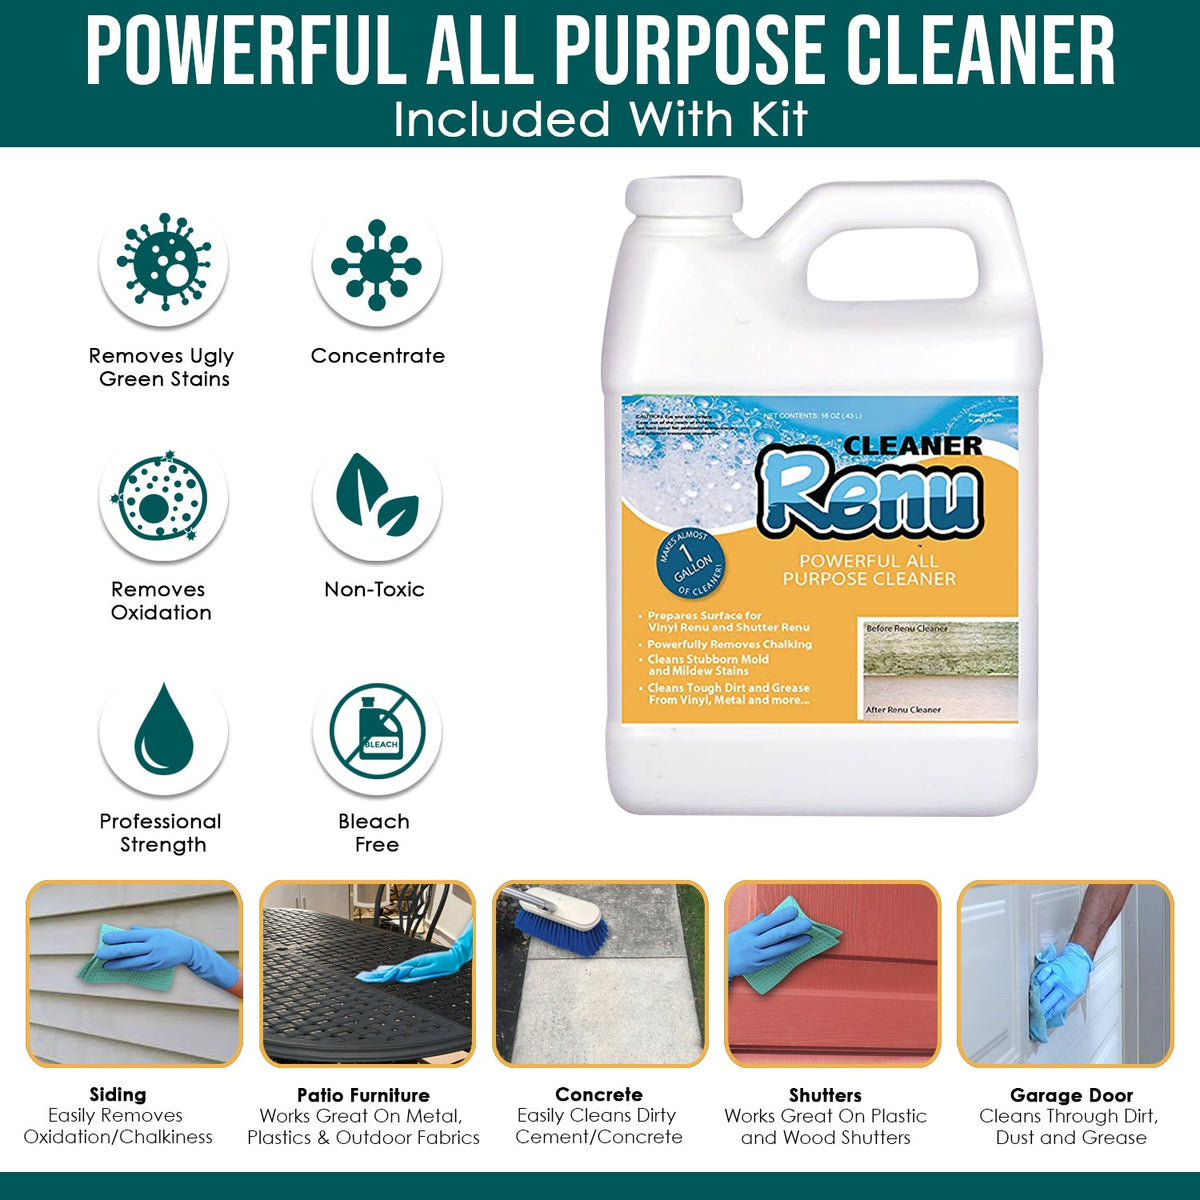 Infographic Describing Non Toxic Vinyl Siding Oxidation Removal Cleaner And Cleaning Concrete Patio Furniture Garage Doors Shutters